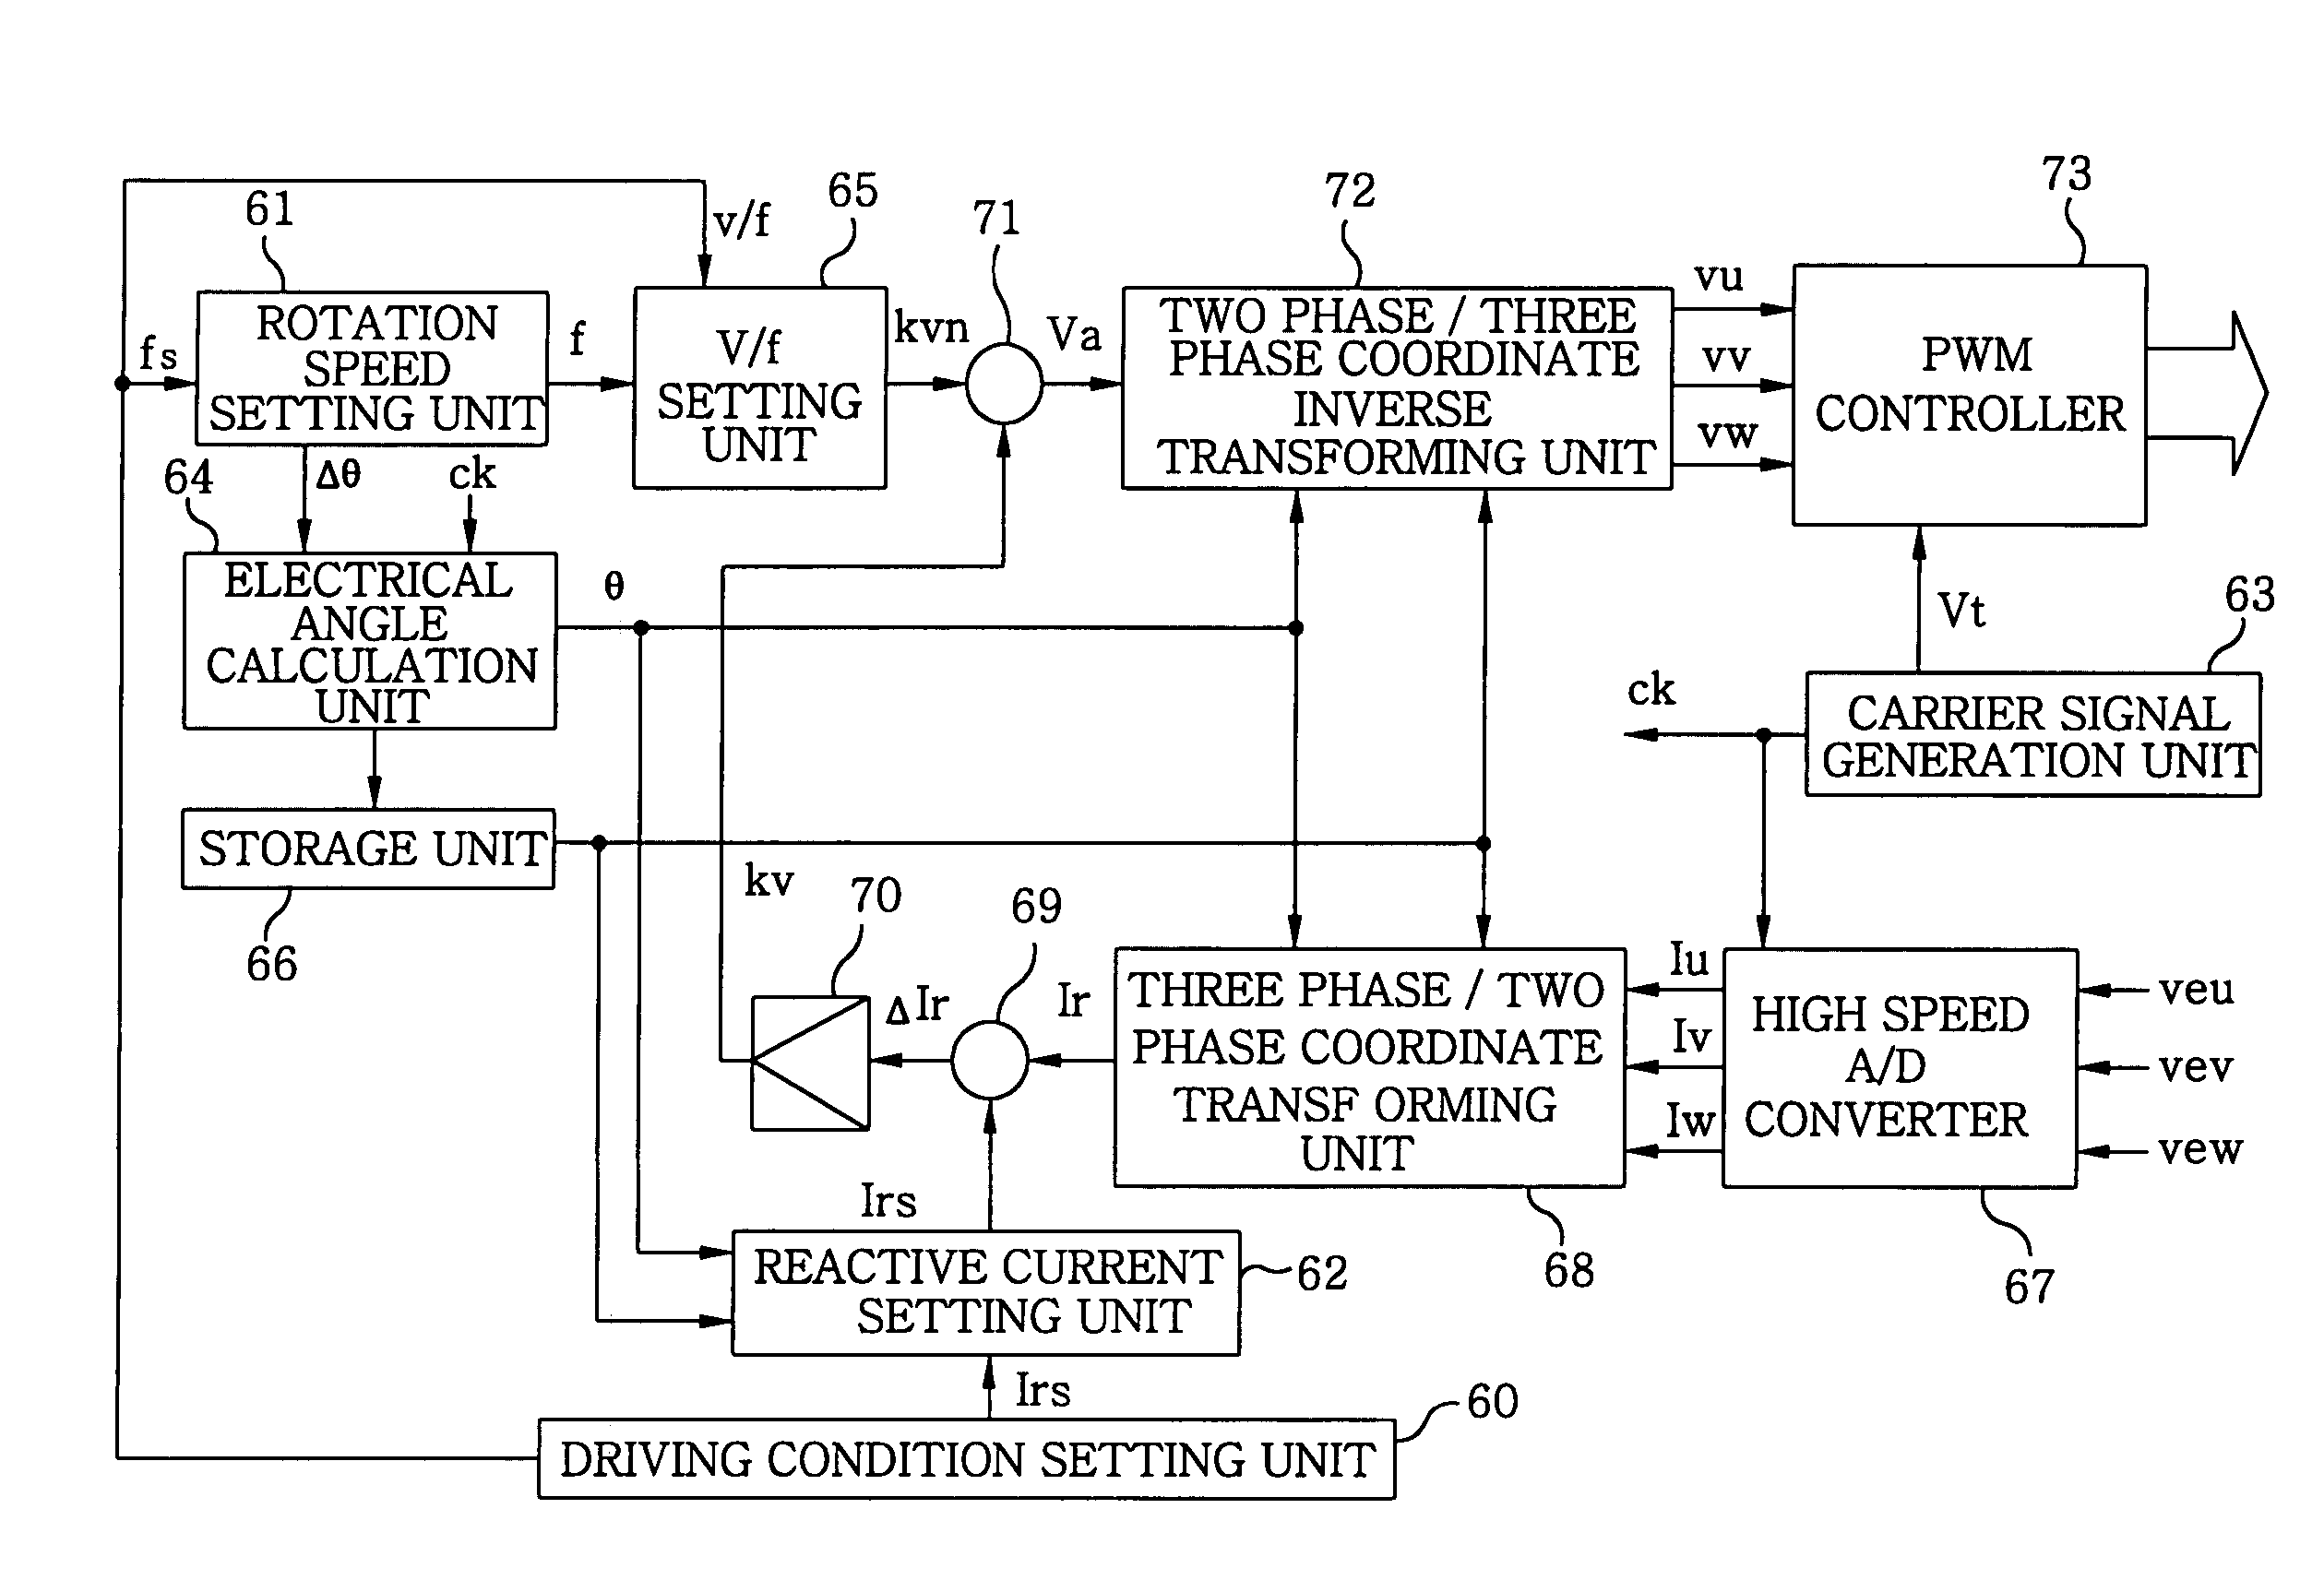 Motor driving apparatus for use in a dishwasher